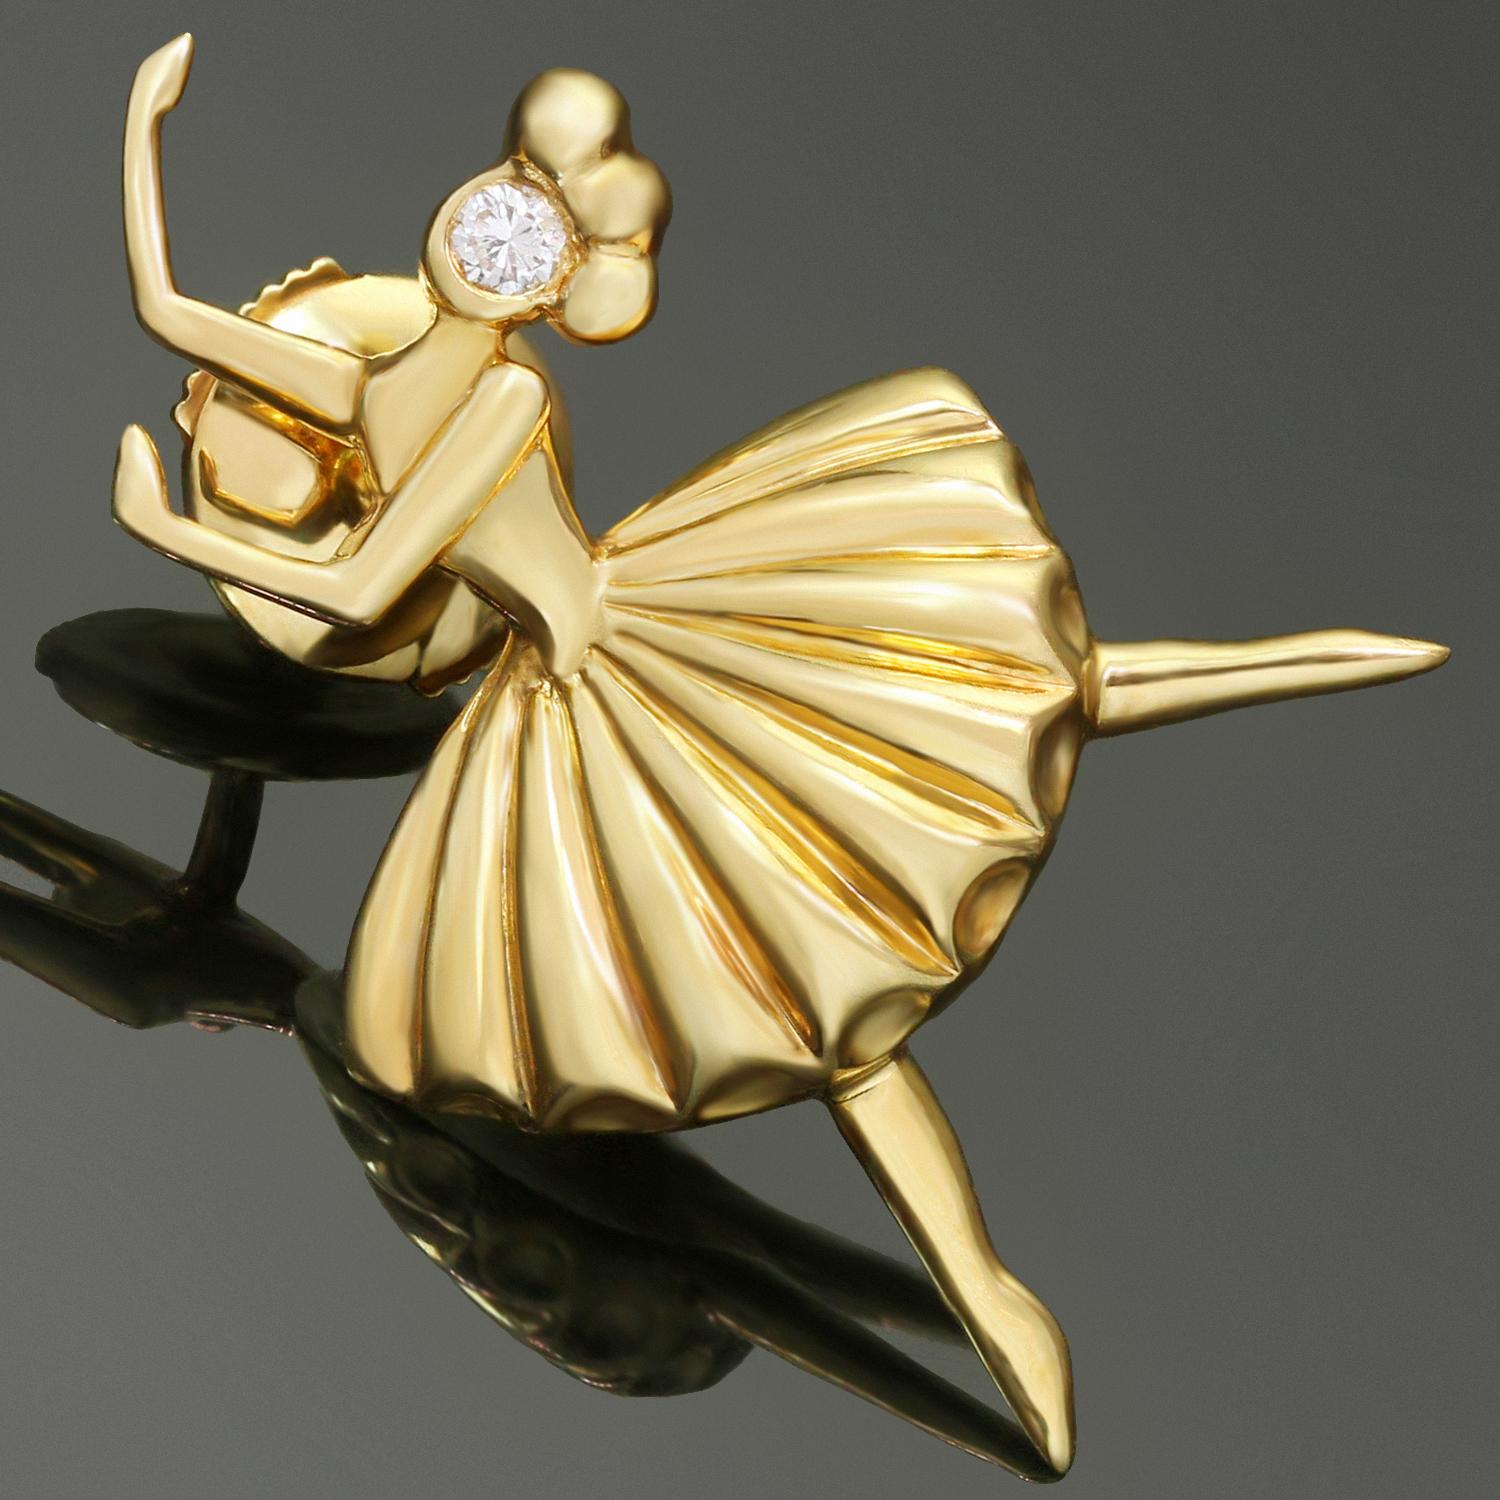 This gorgeous vintage Van Cleef & Arpels pin is crafted in 18k yellow gold as Arabesque ballerina in a fluted tutu accented with a brilliant-cut diamond of an estimated 0.03 carats. Made in France circa 1950s. Measurements: 0.66